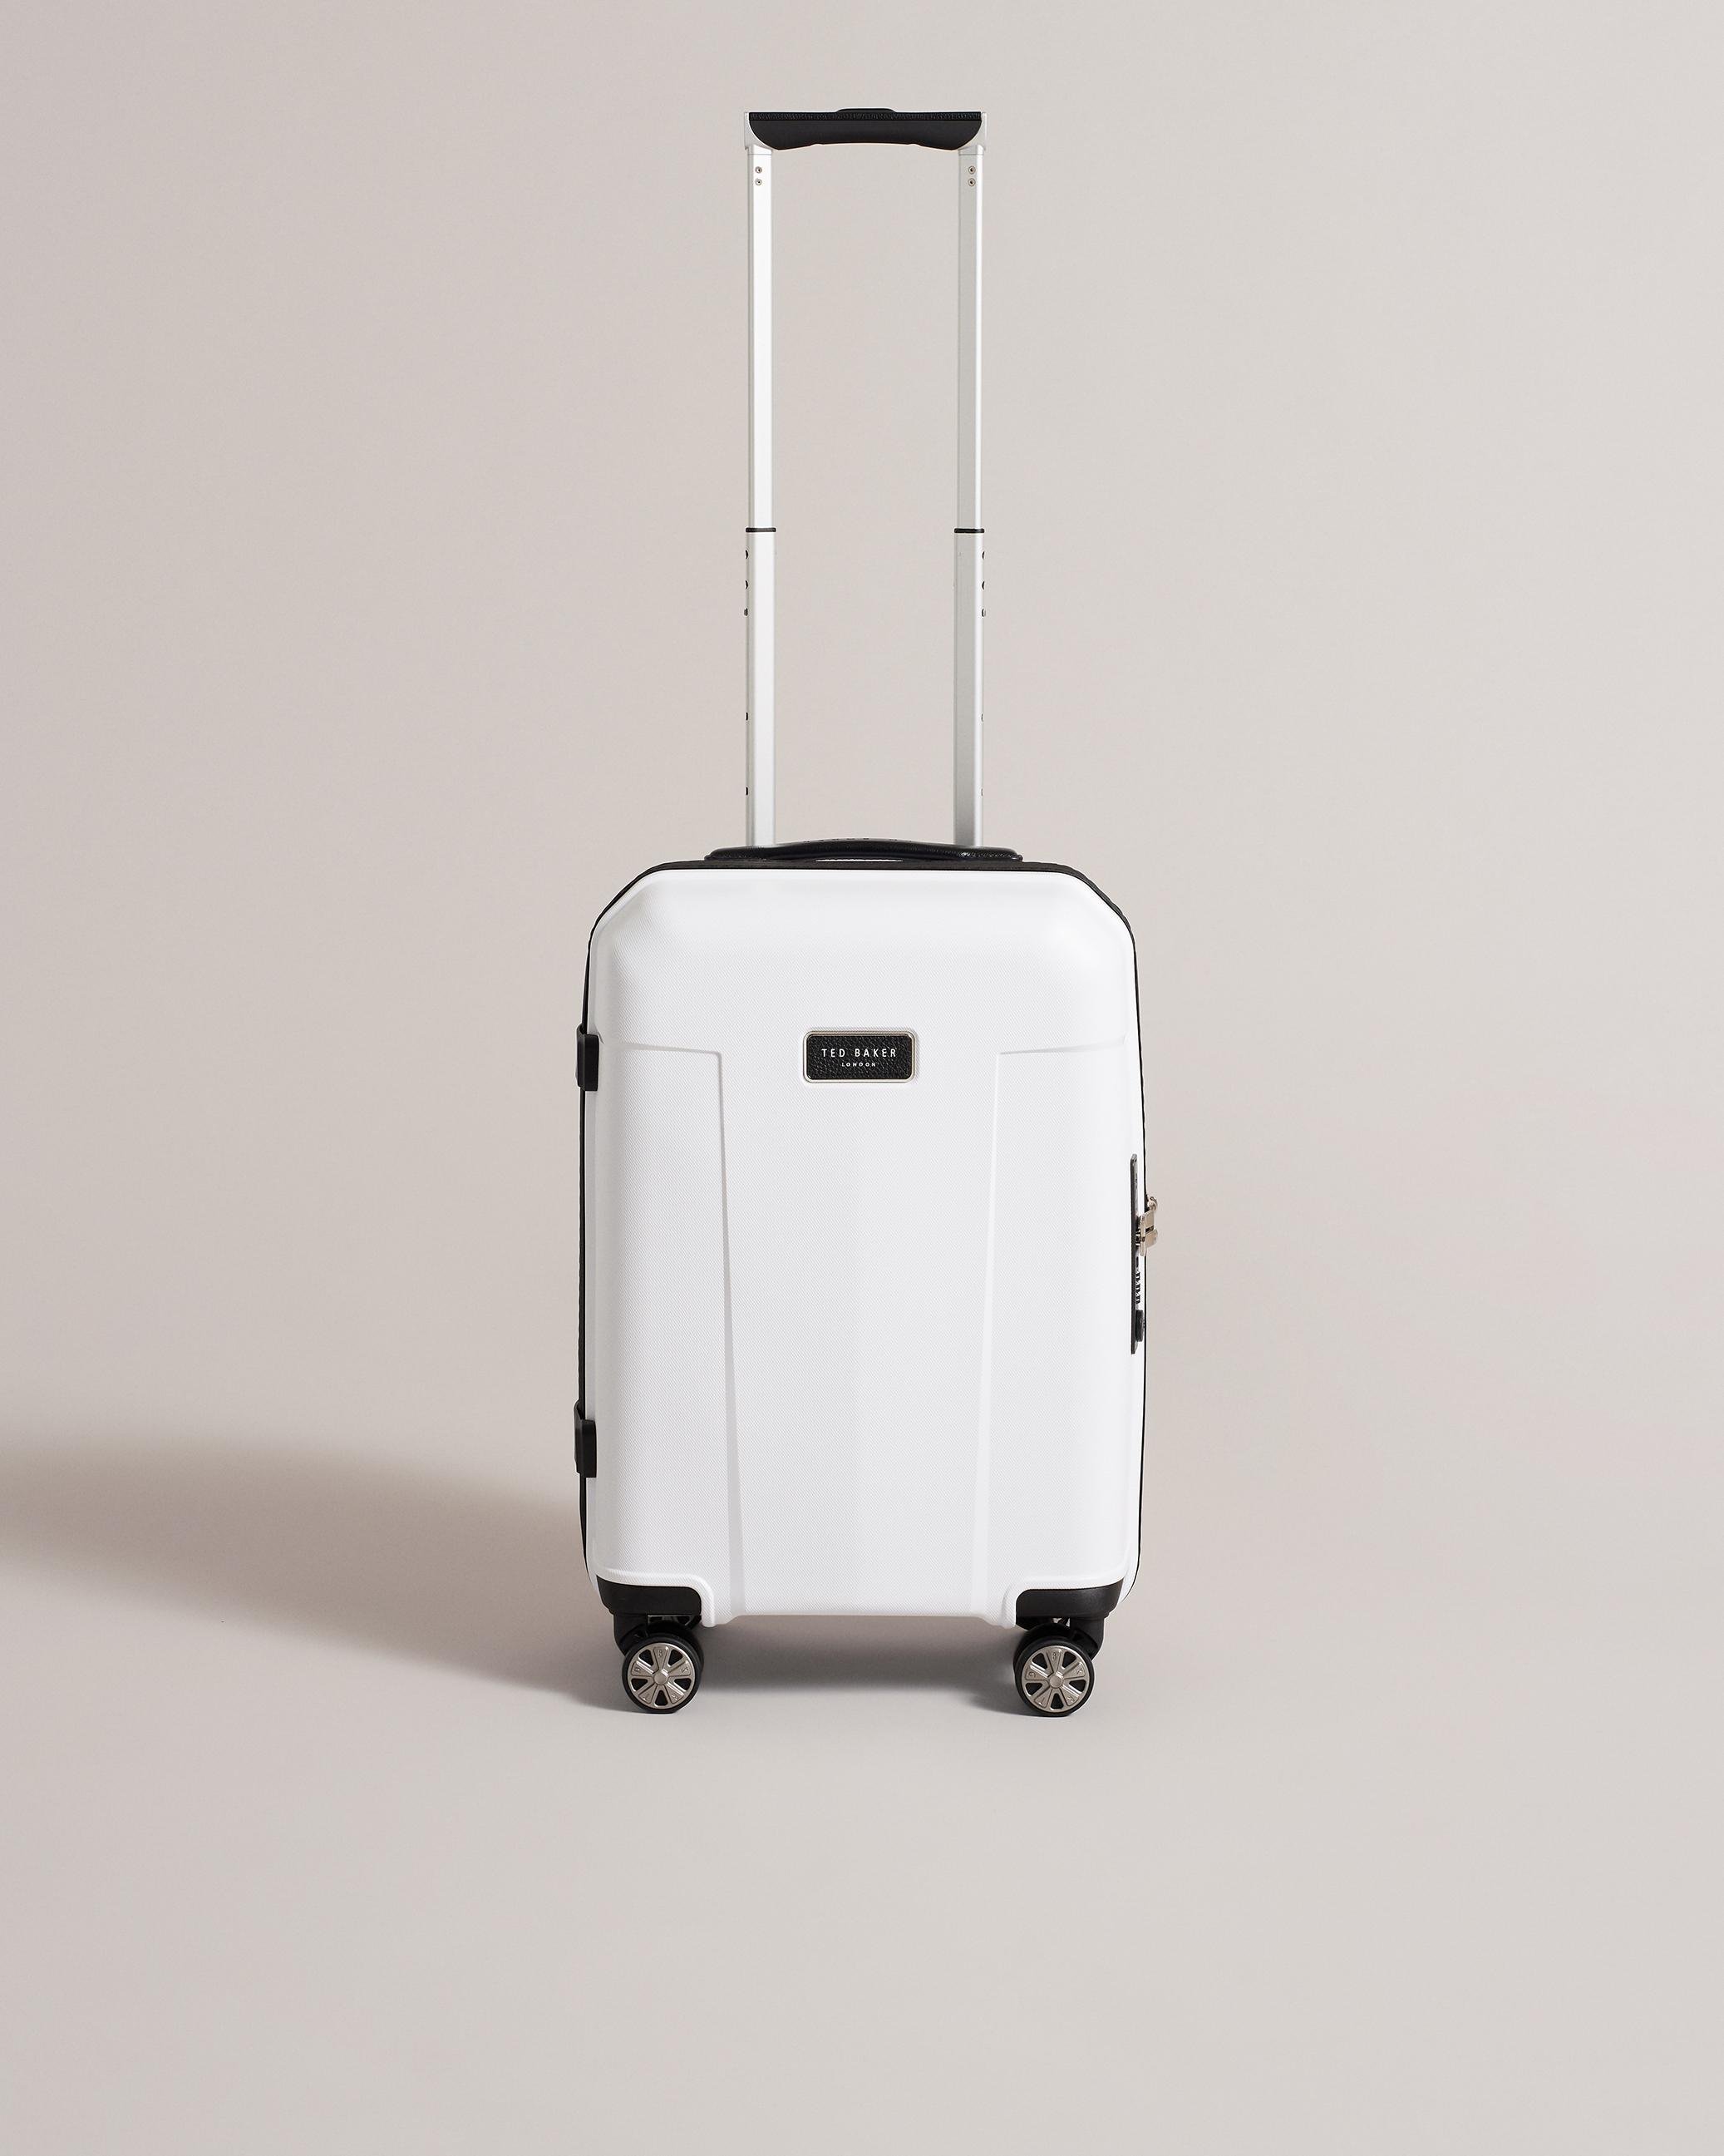 Small Trolley Suitcase - TRAVL - White by TED BAKER